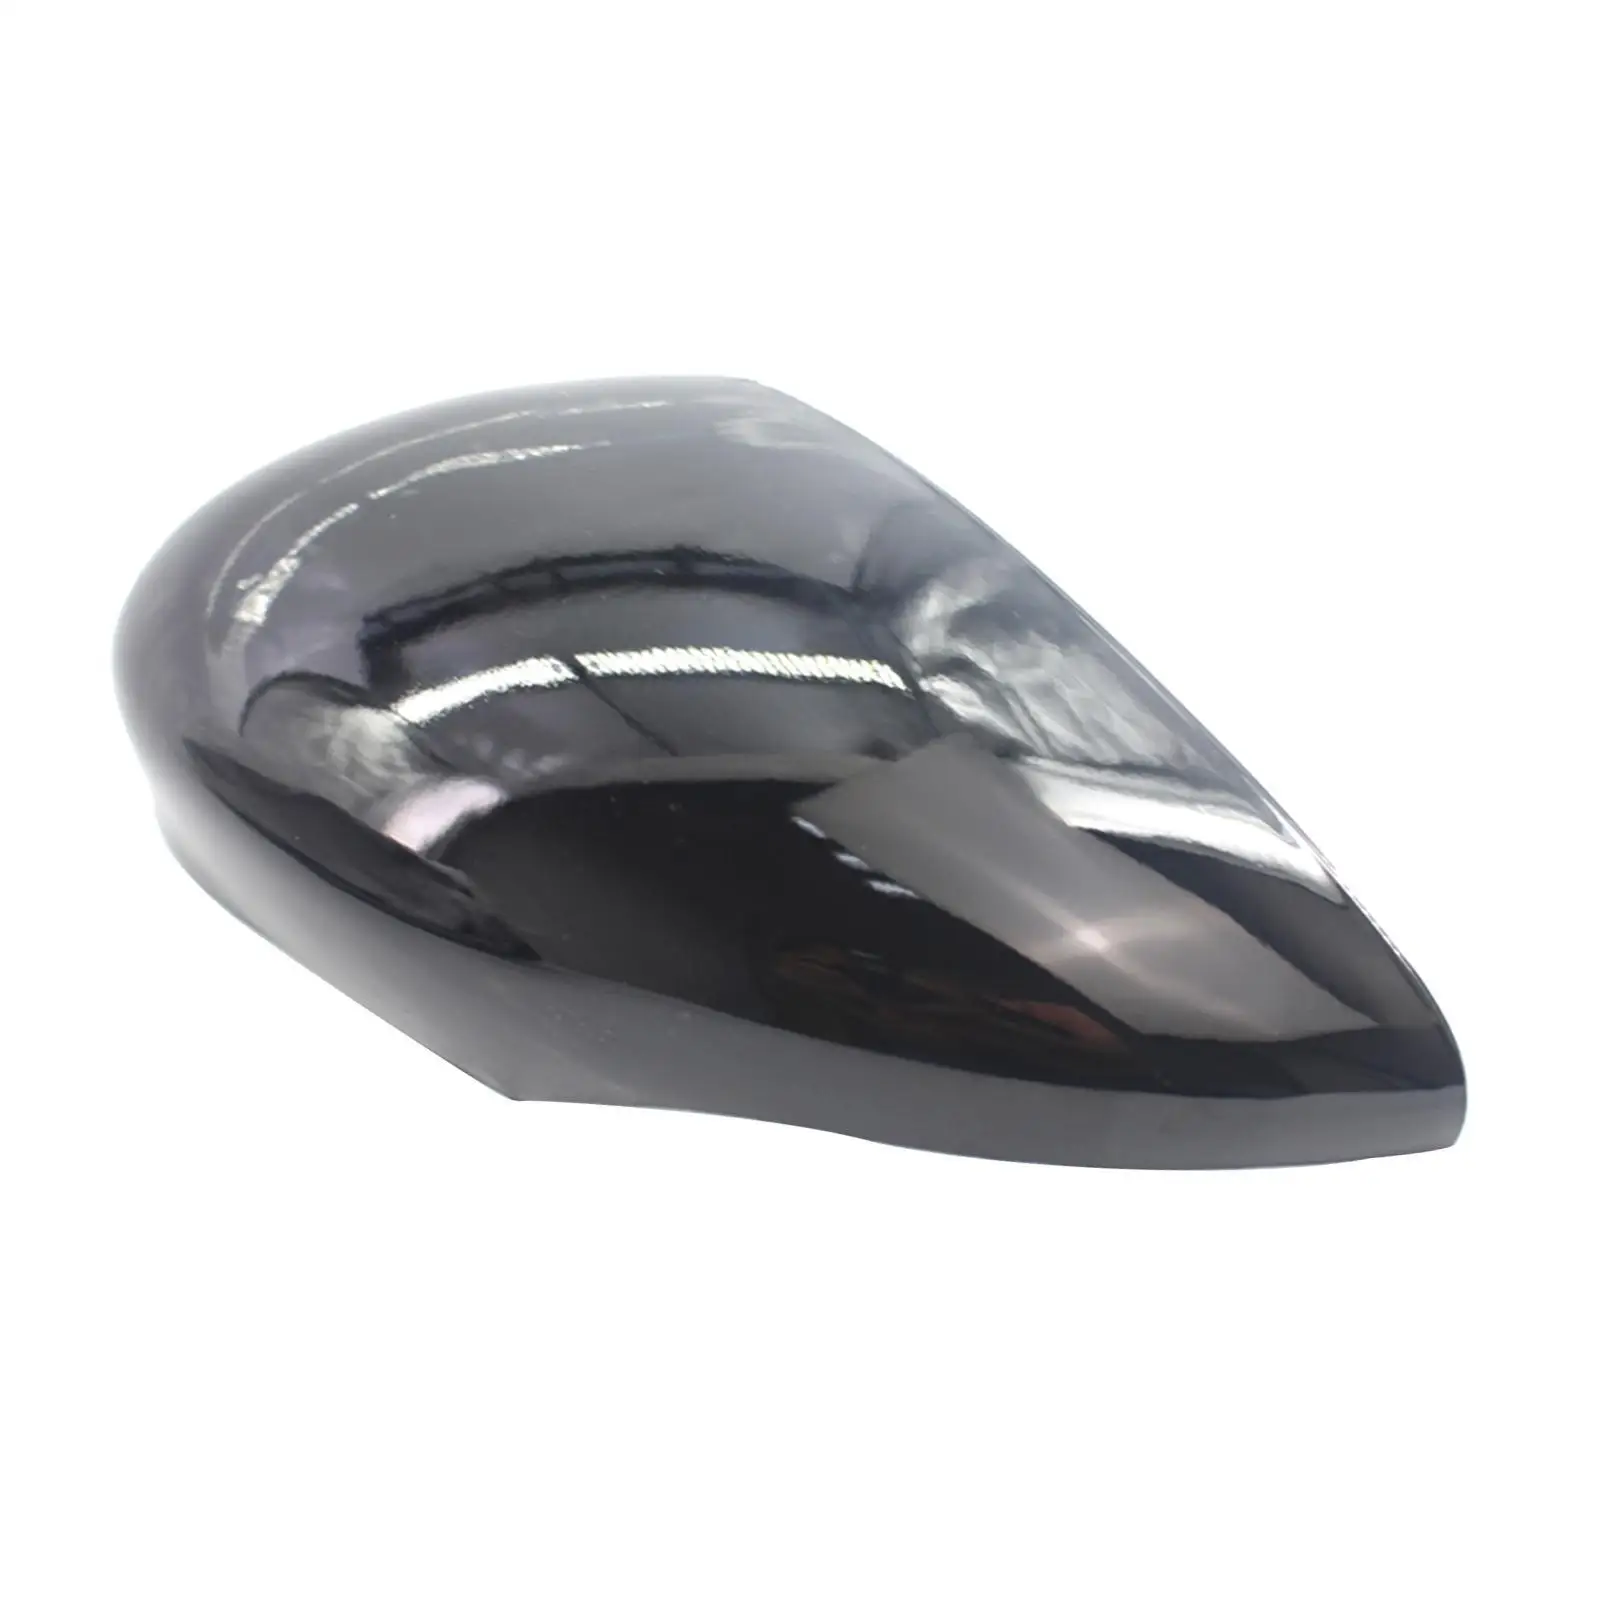 Automotive Rearview Mirror Left Side Mirror Cover Caps Wing Mirror Cover Compatible with Ford Fiesta 2009?2014